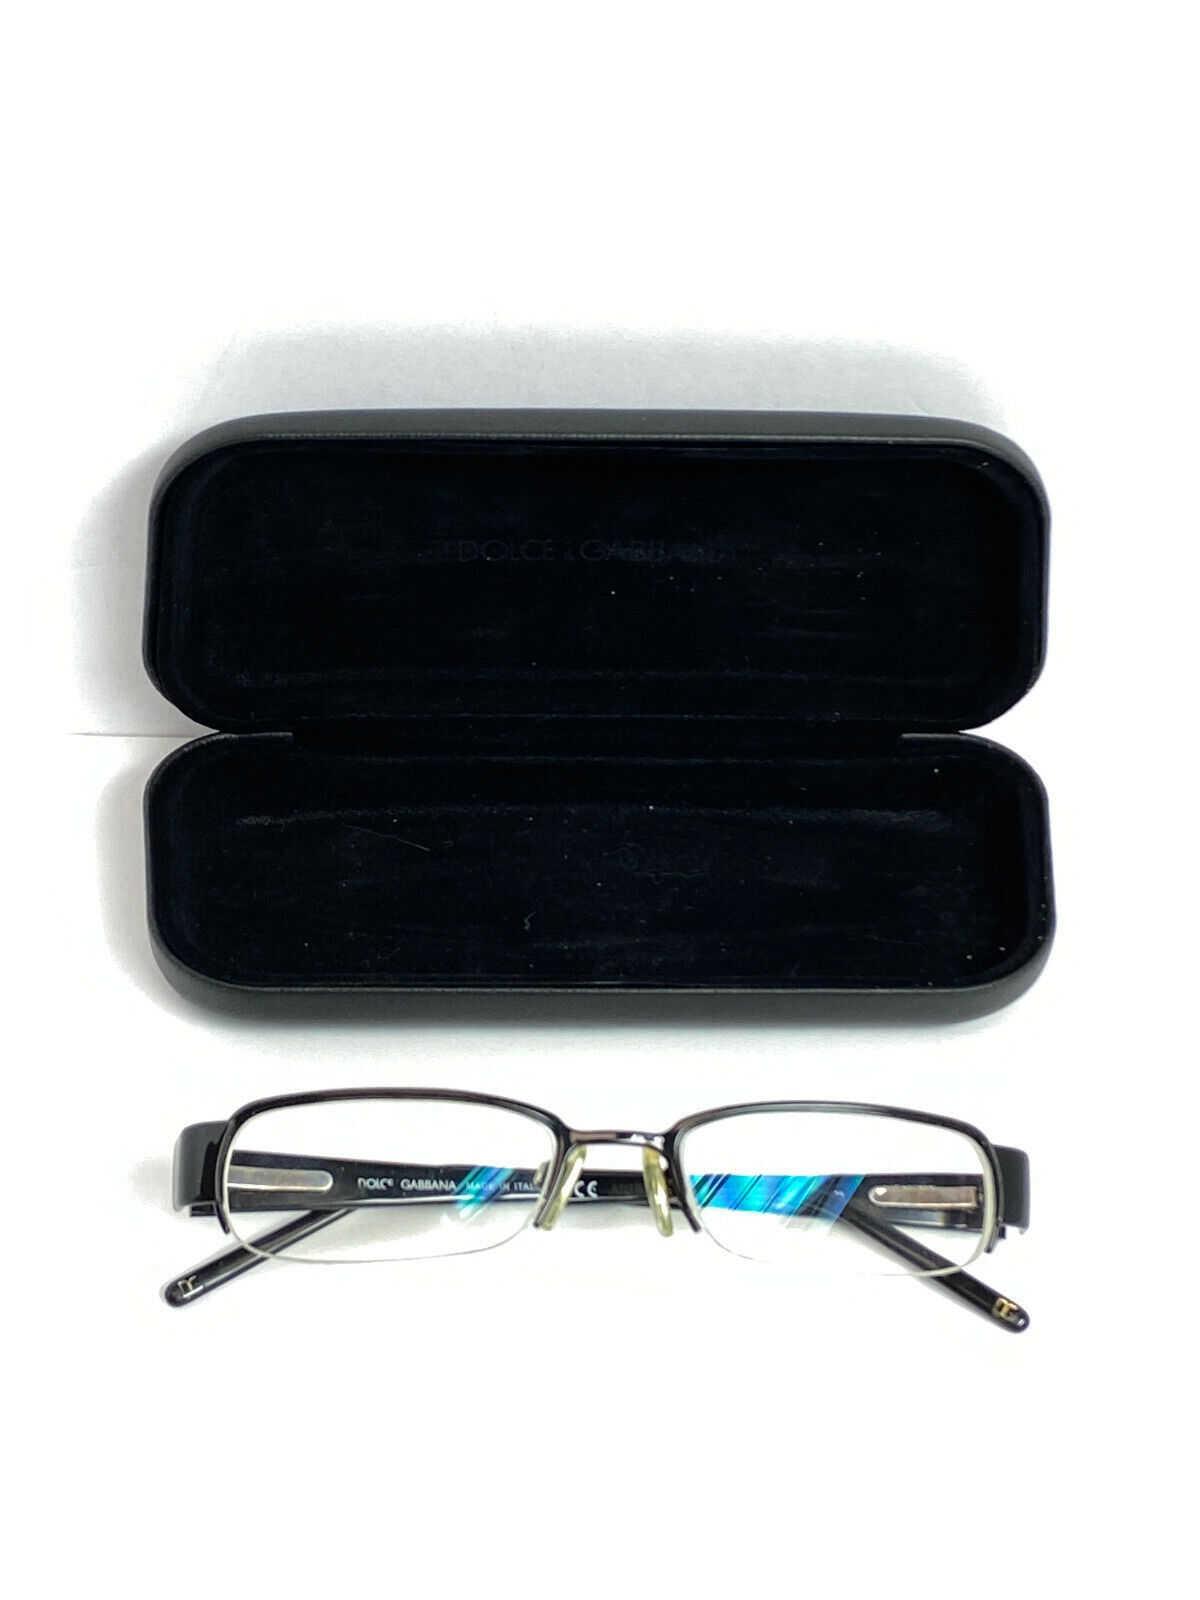 Dolce and Gabbana Reading Glasses with Case - Made in Italy  - $75.52